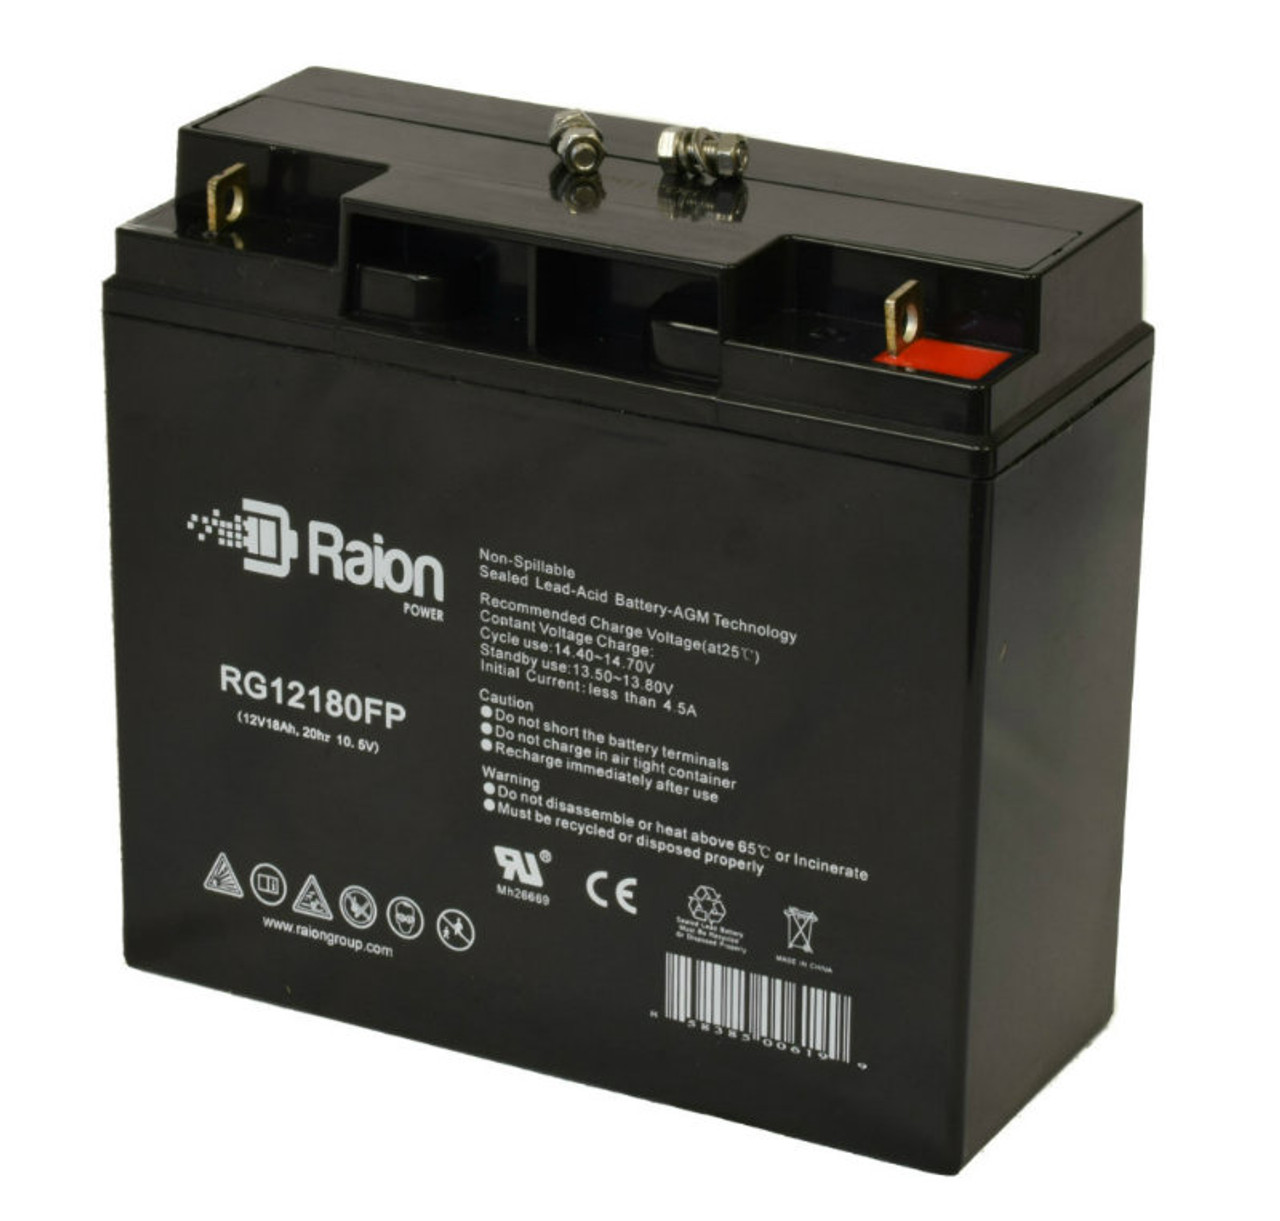 Raion Power RG12180FP 12V 18Ah Lead Acid Battery for Quick Cable Rescue 950 Portable Power Pack 604051